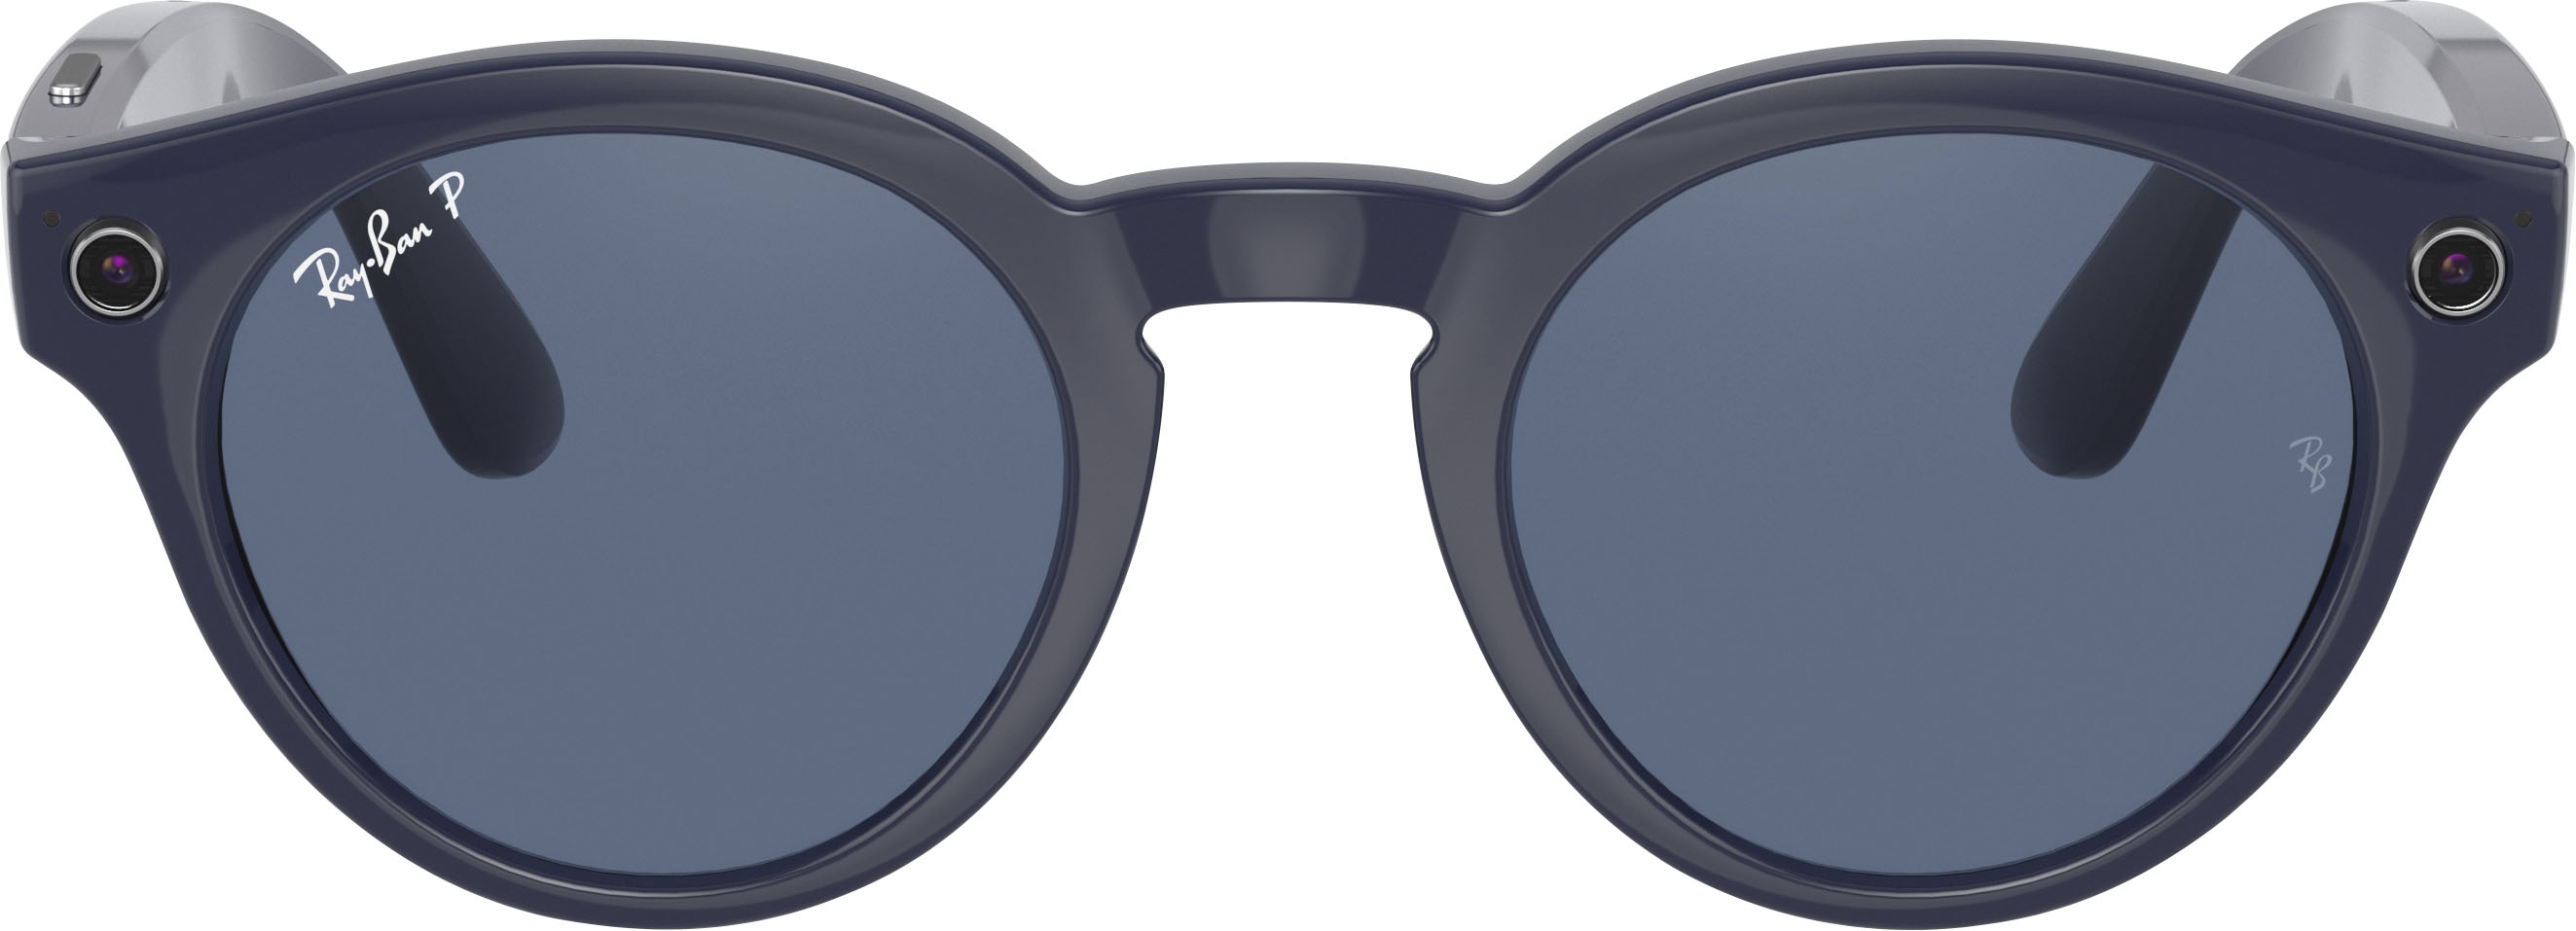 Zoom in on Angle Zoom. Ray-Ban - Stories Round Smart Glasses - Shiny Blue/Dark Blue Polarized.